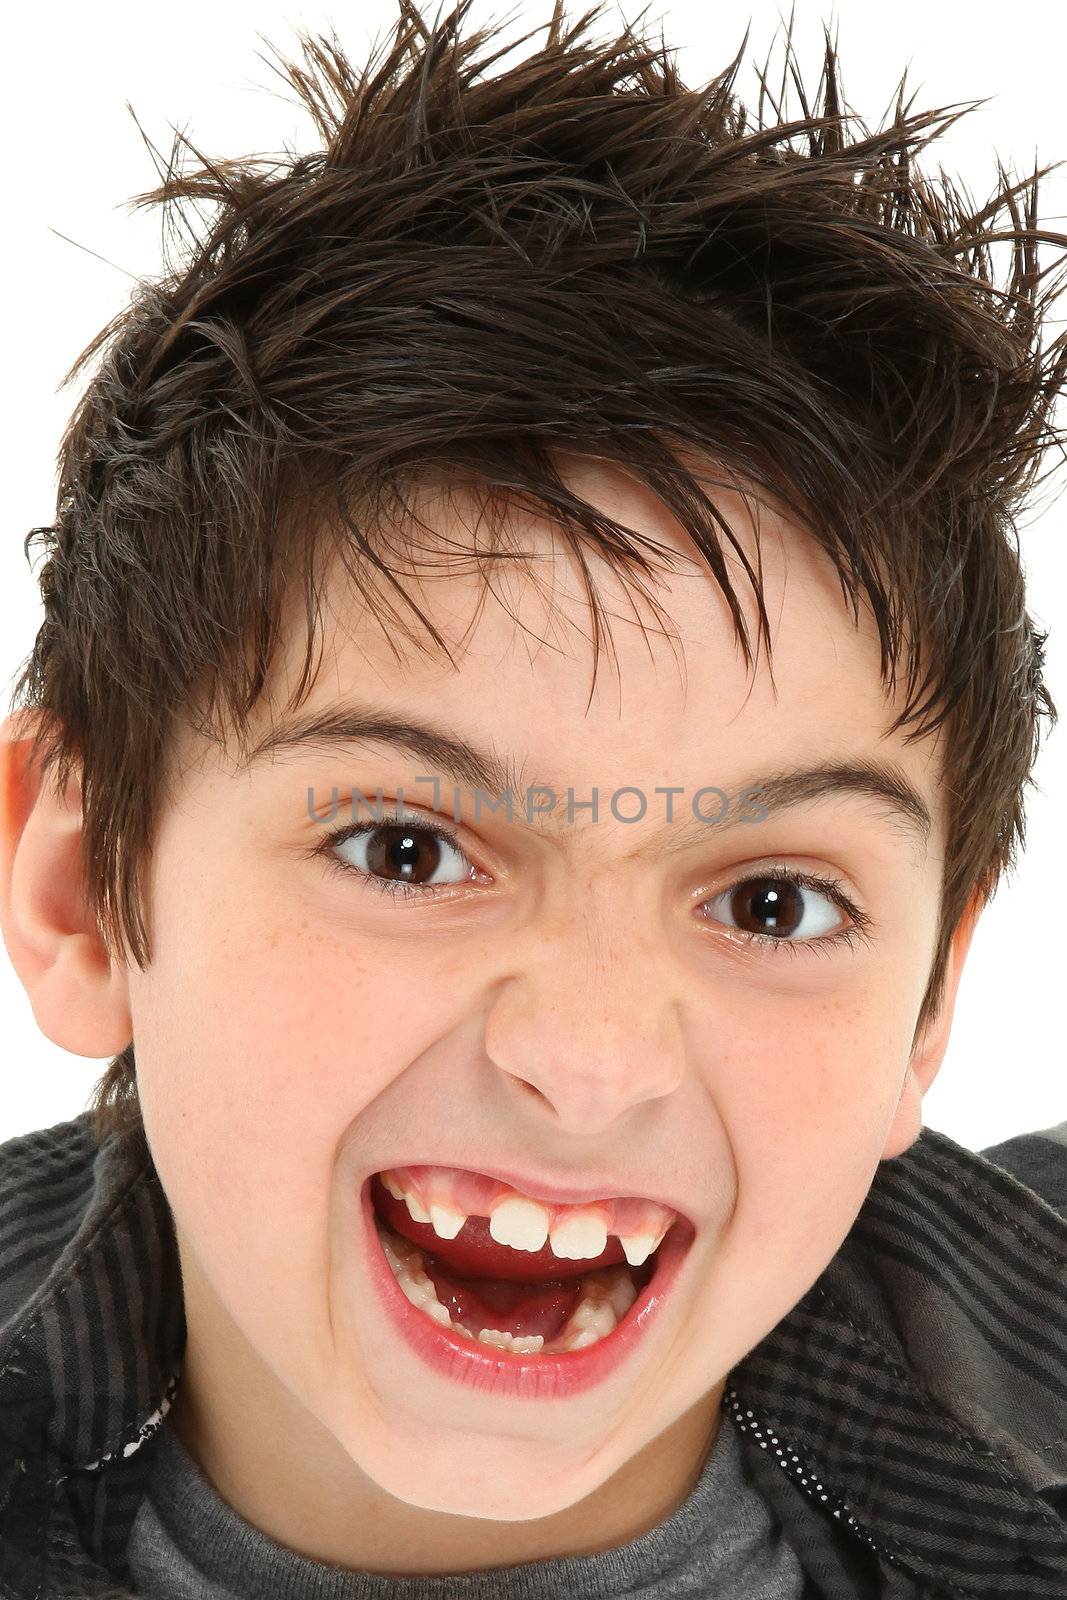 Crazy Face Close Up Child by duplass